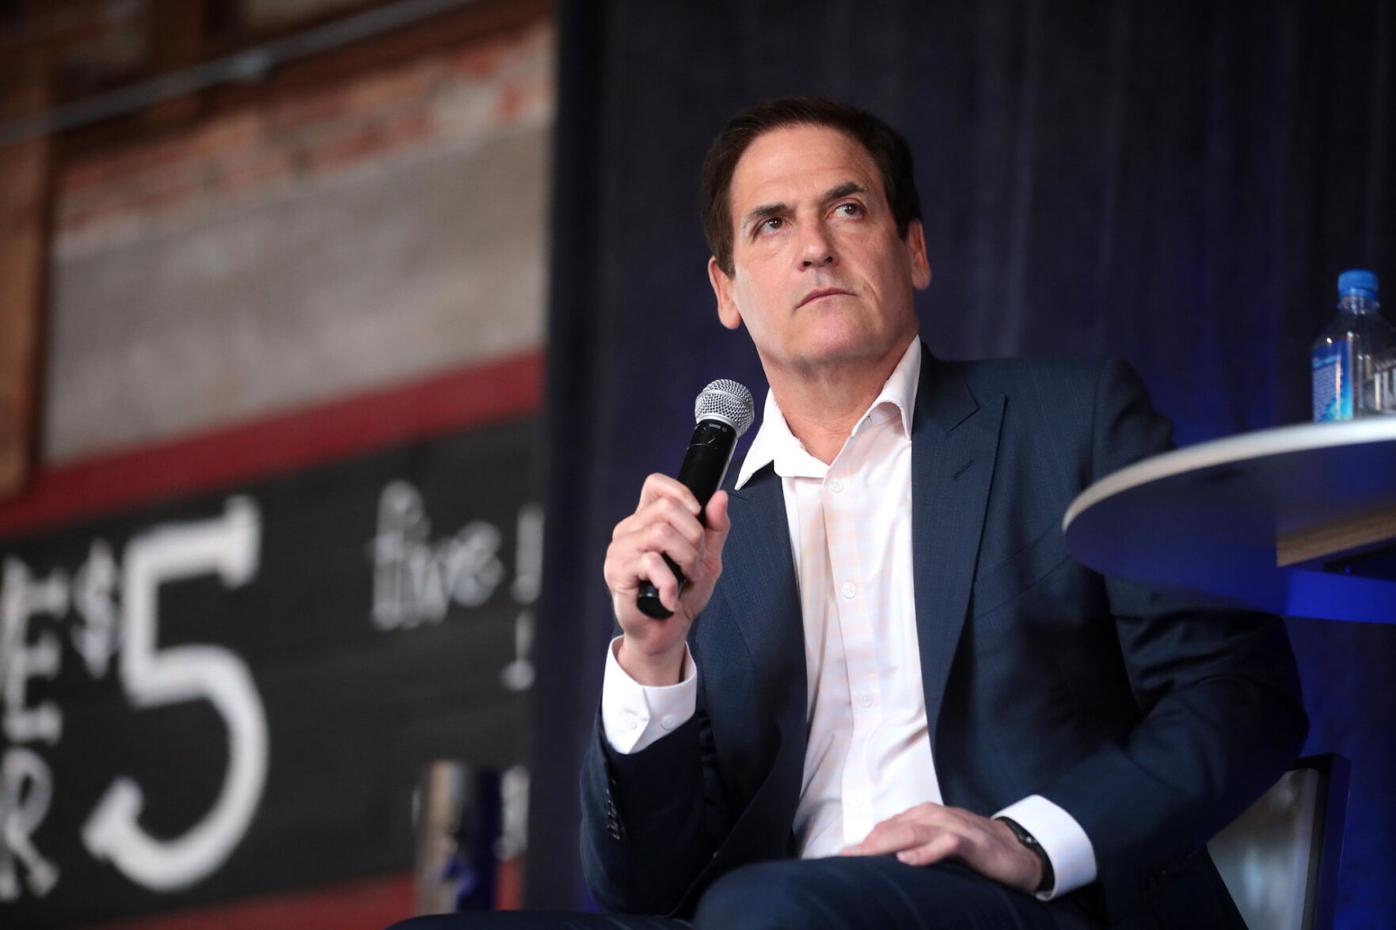 Mark Cuban Condemns China On Human Rights But Avoids Specifics